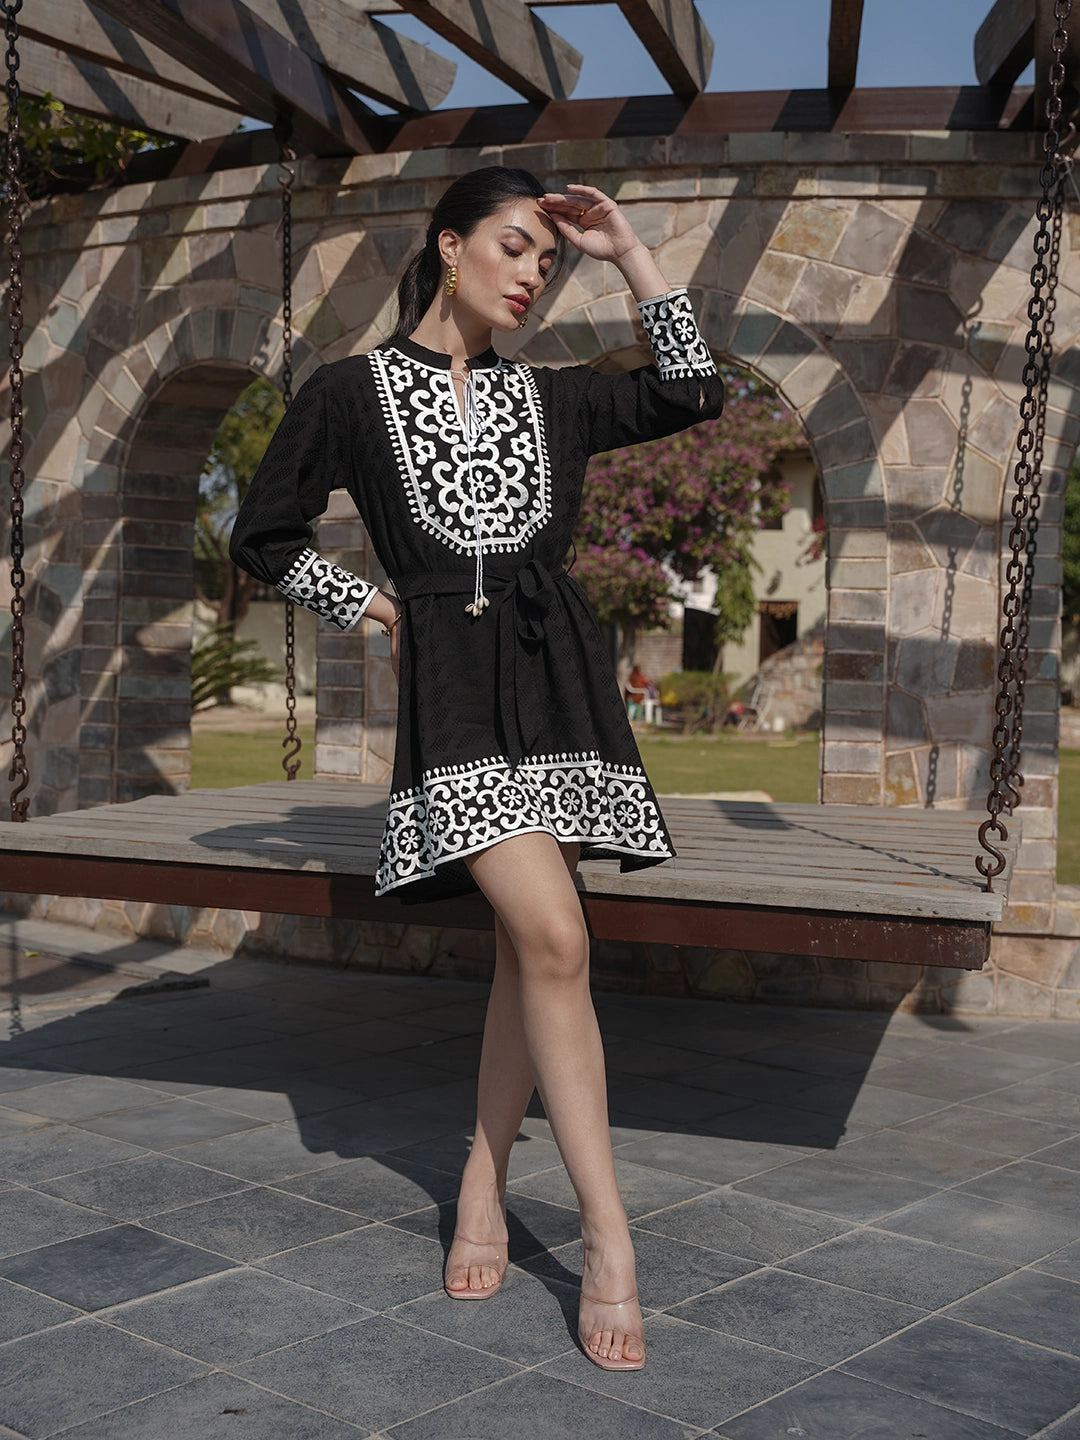 Monochrome Muse: Black Short Dress with White Embroidery